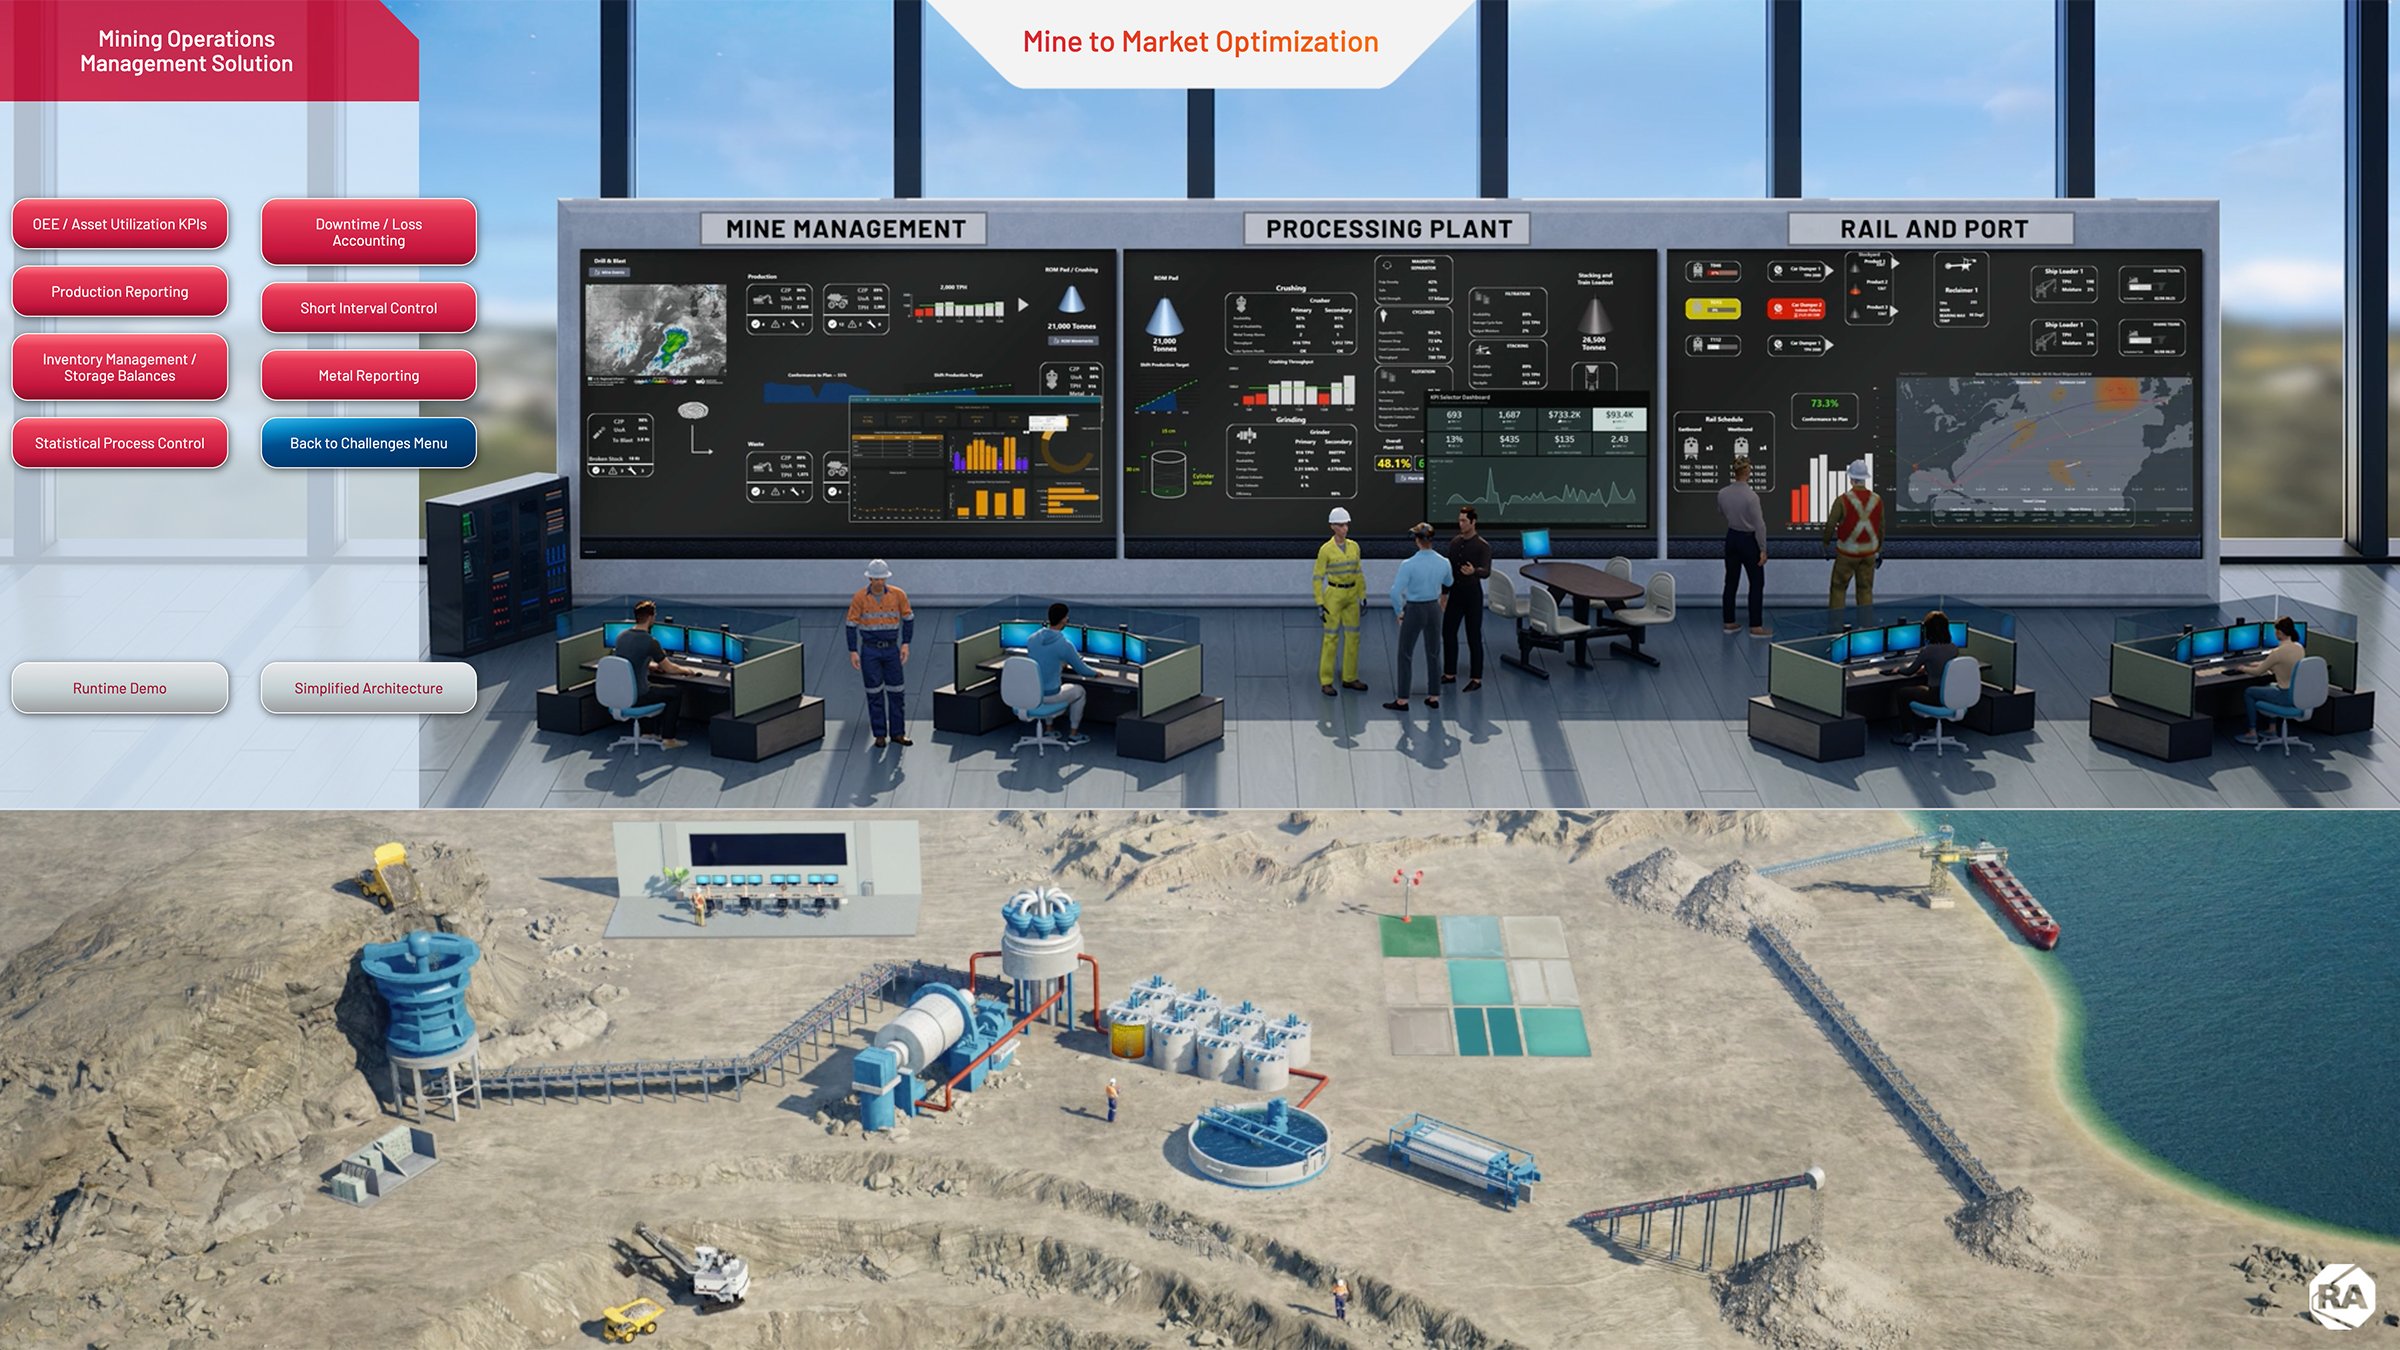 Mining Operations Management interactive screen shots shows how it works.